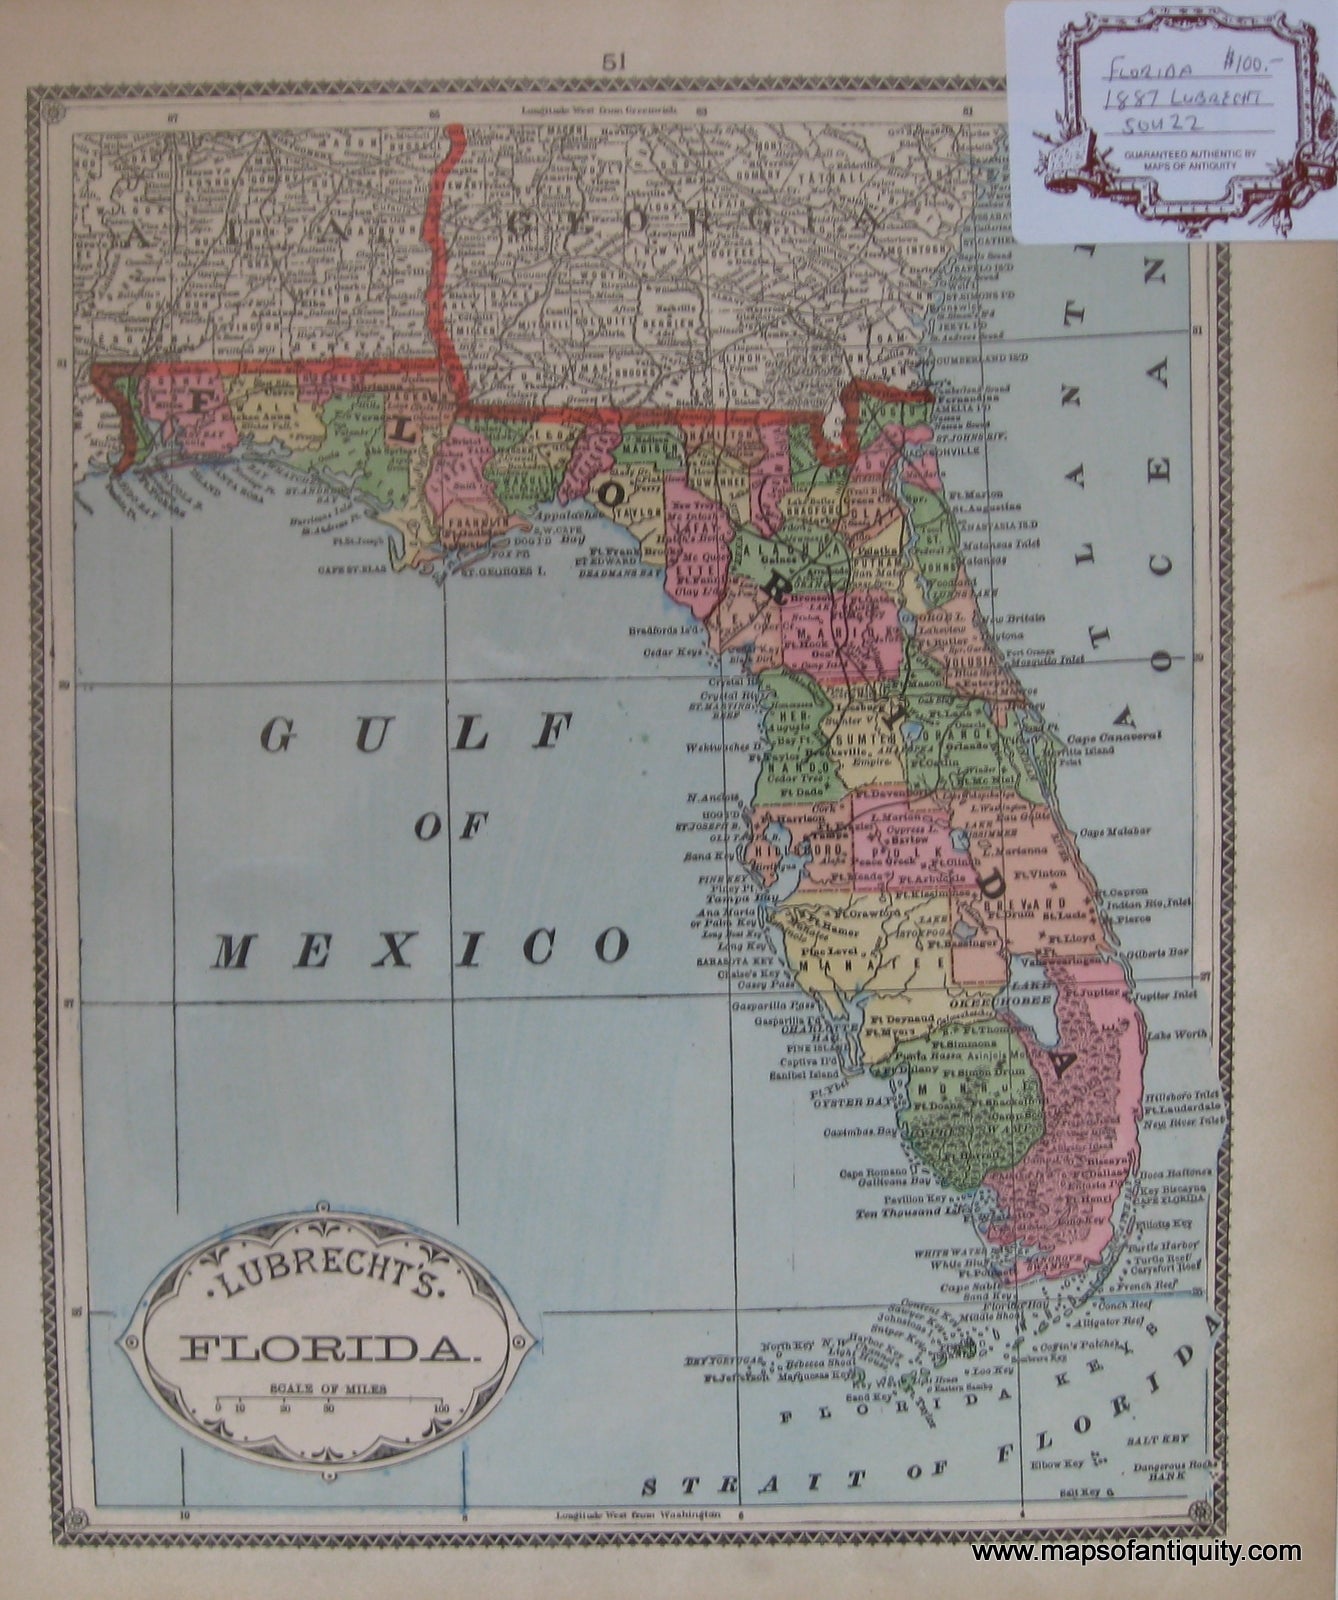 Hand-colored-Lubrecht's-Florida**********-United-States-South-1887-Lubrecht-Maps-Of-Antiquity